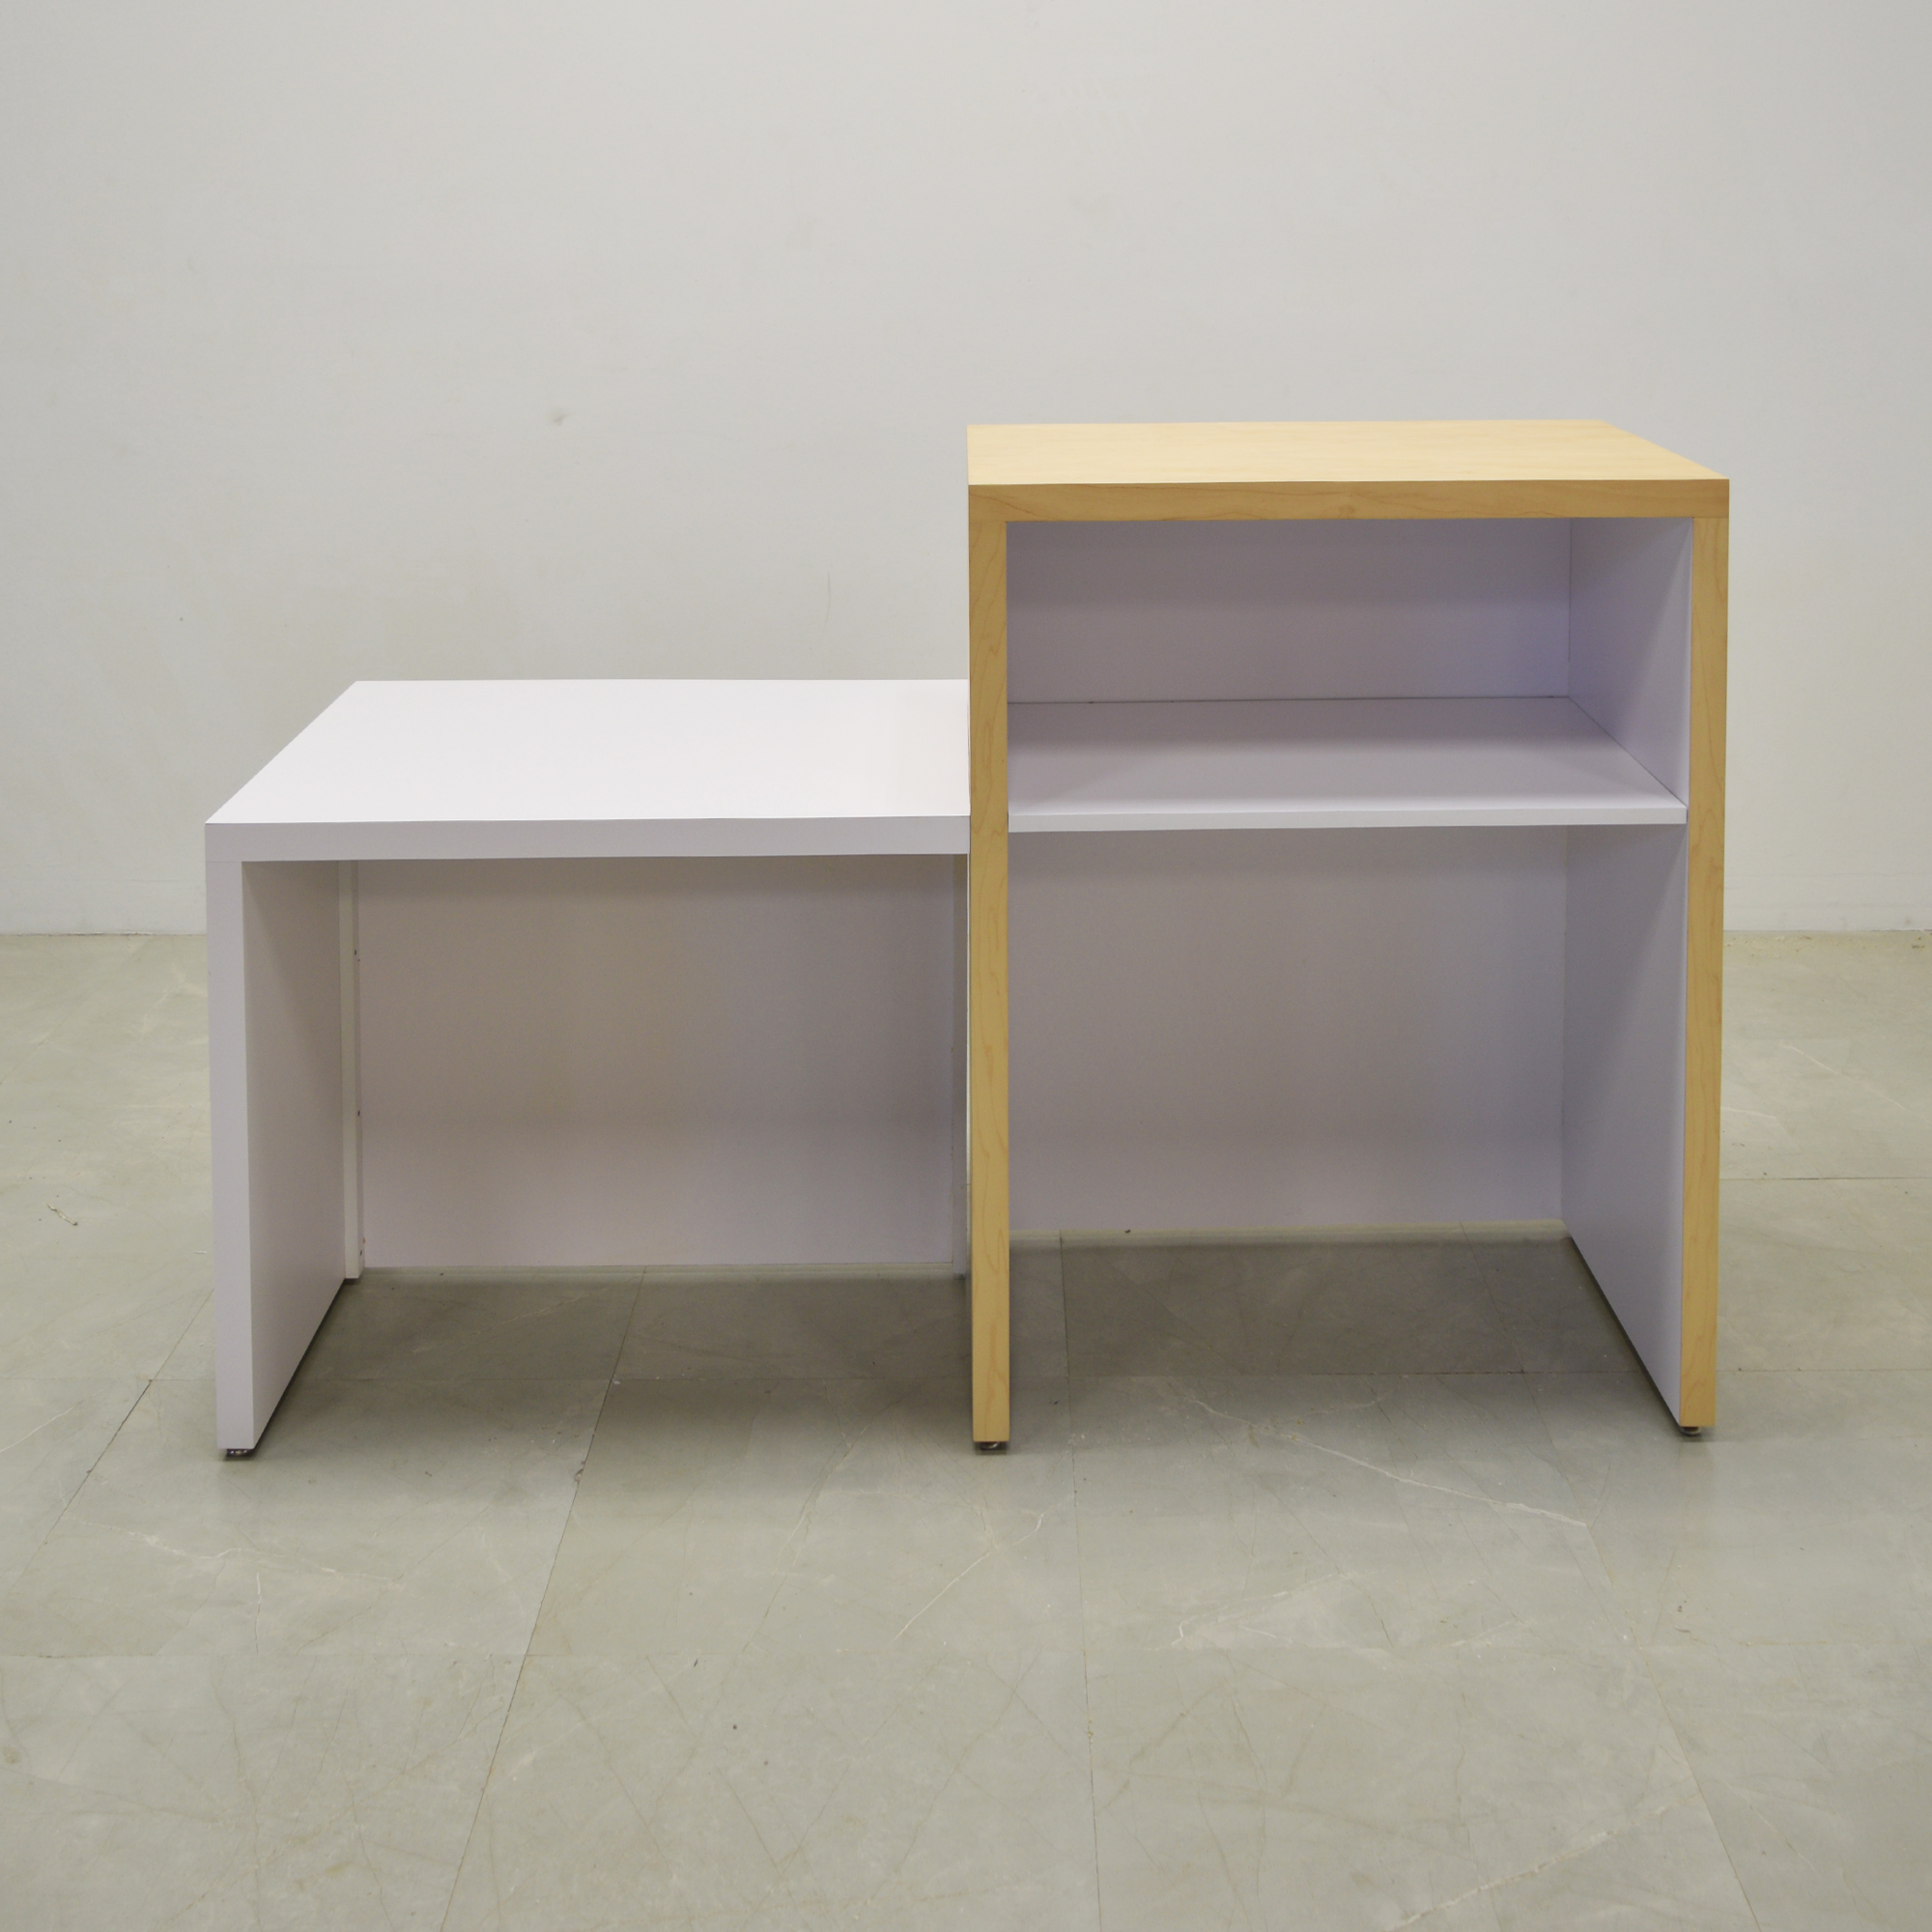 72 inches Phoenix Reception Desk in white matte laminate desk with a maple wood veneer counter, seating side view shown here.